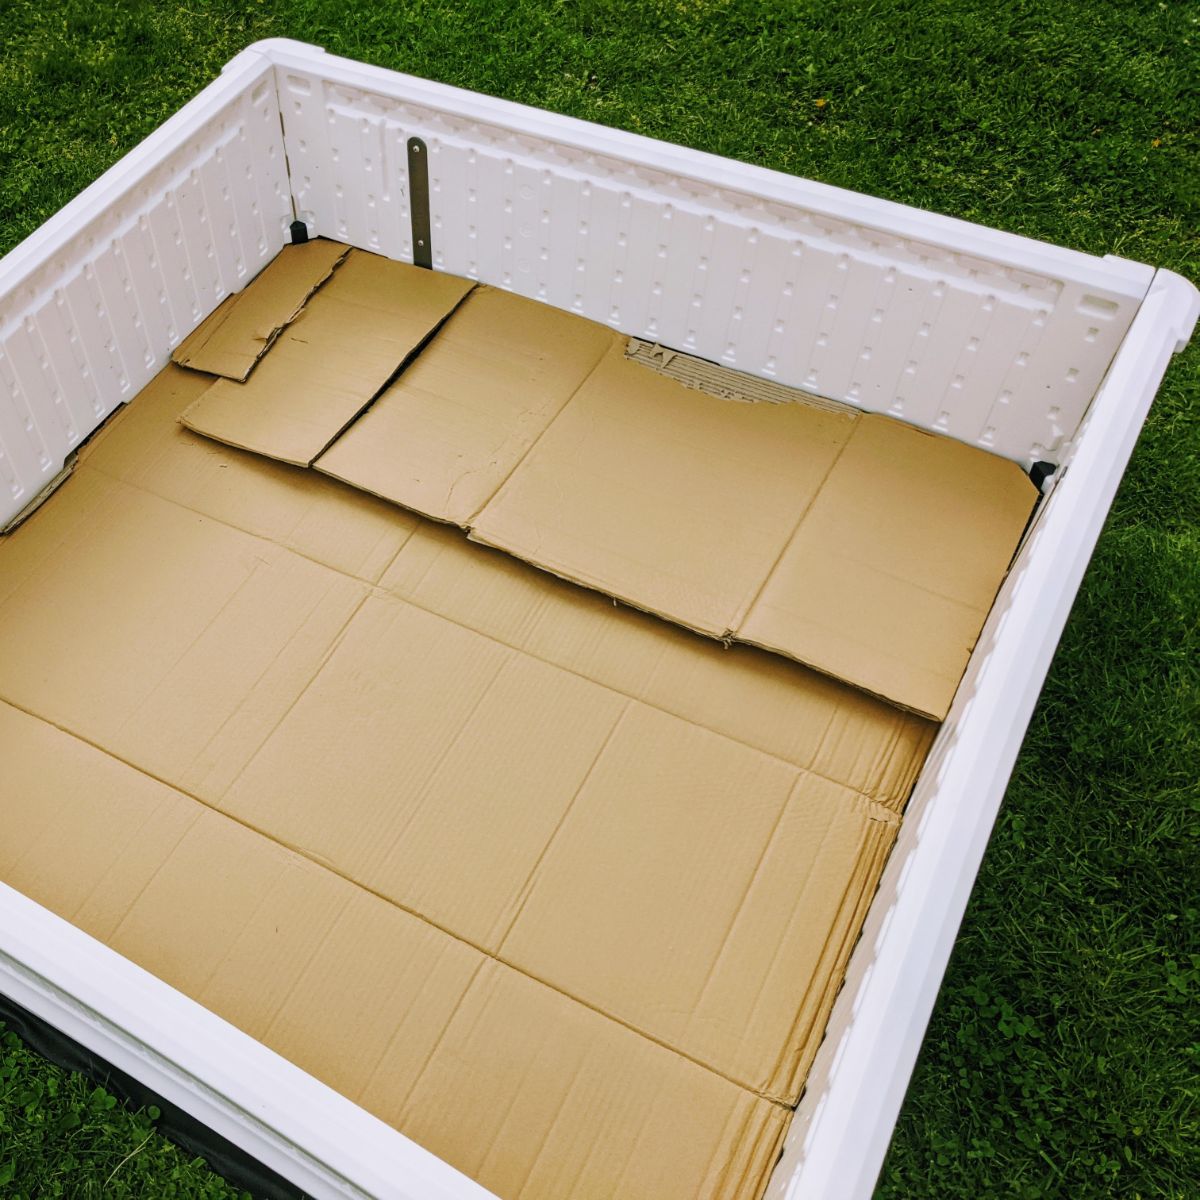 Layer of cardboard on the bottom of a Giantex raised garden bed